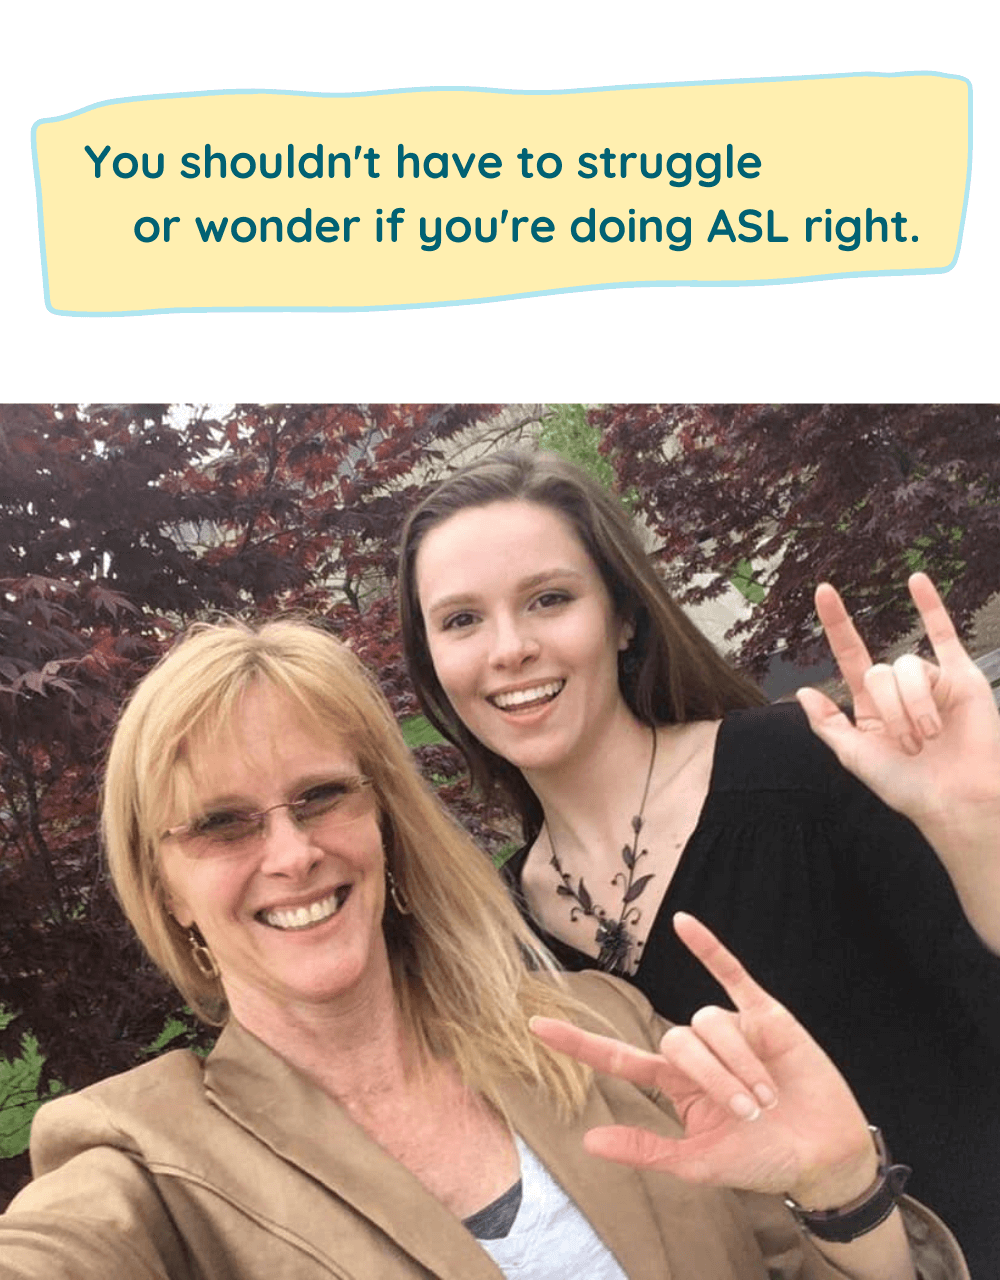 You shouldn't have to struggle or wonder if you're doing ASL right.